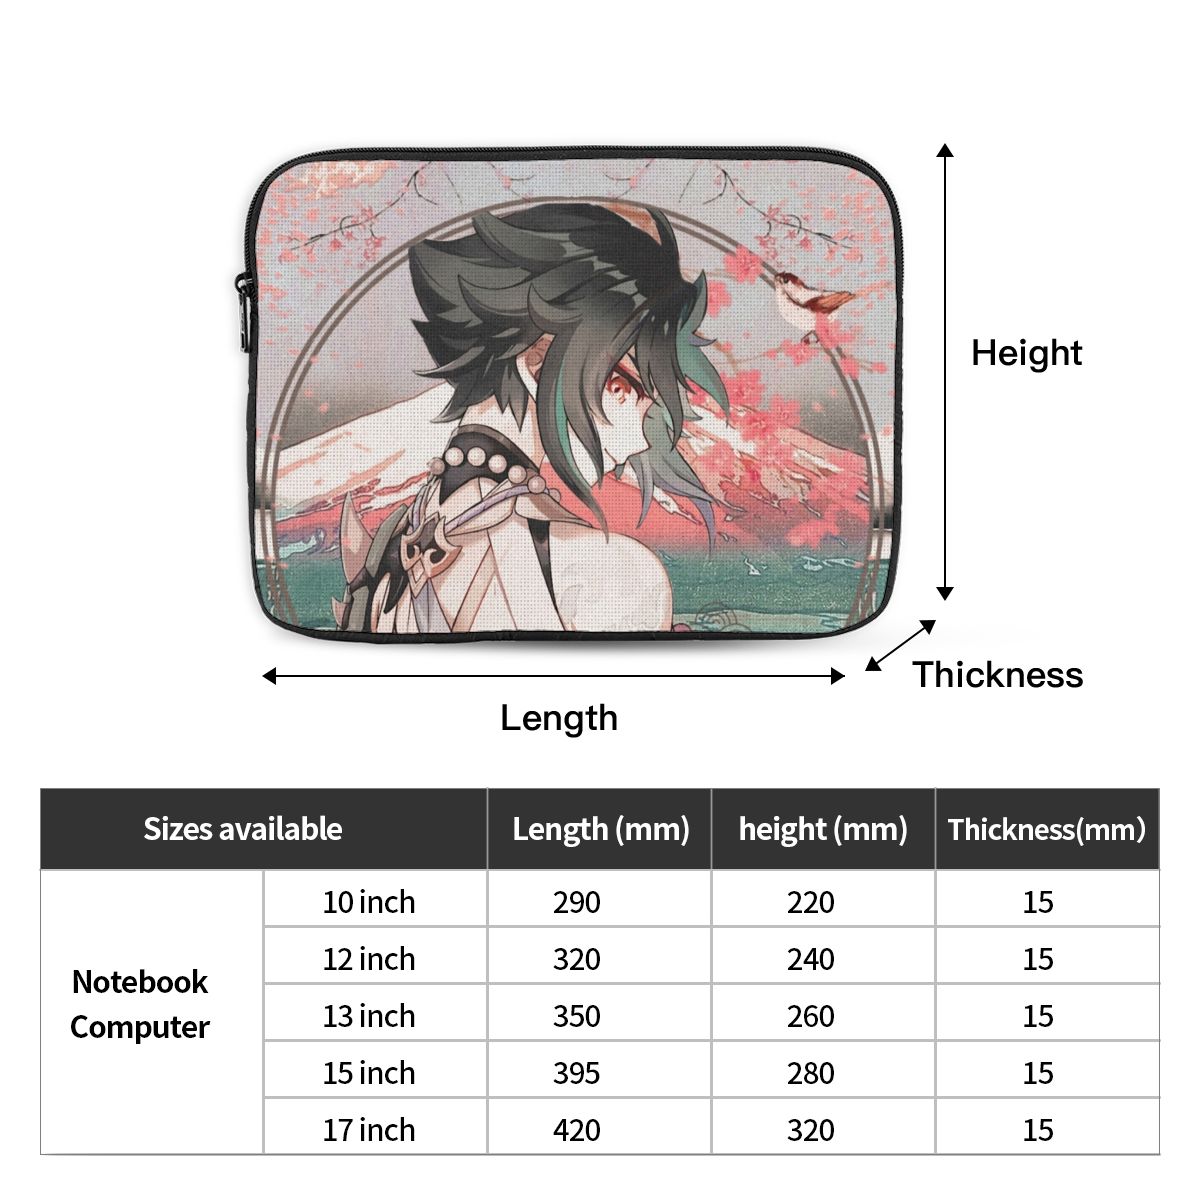 Get your laptop case of Xiao from Genshin Impact| If you are looking for Genshin Impact Merch, We have it all! | check out all our Anime Merch now!